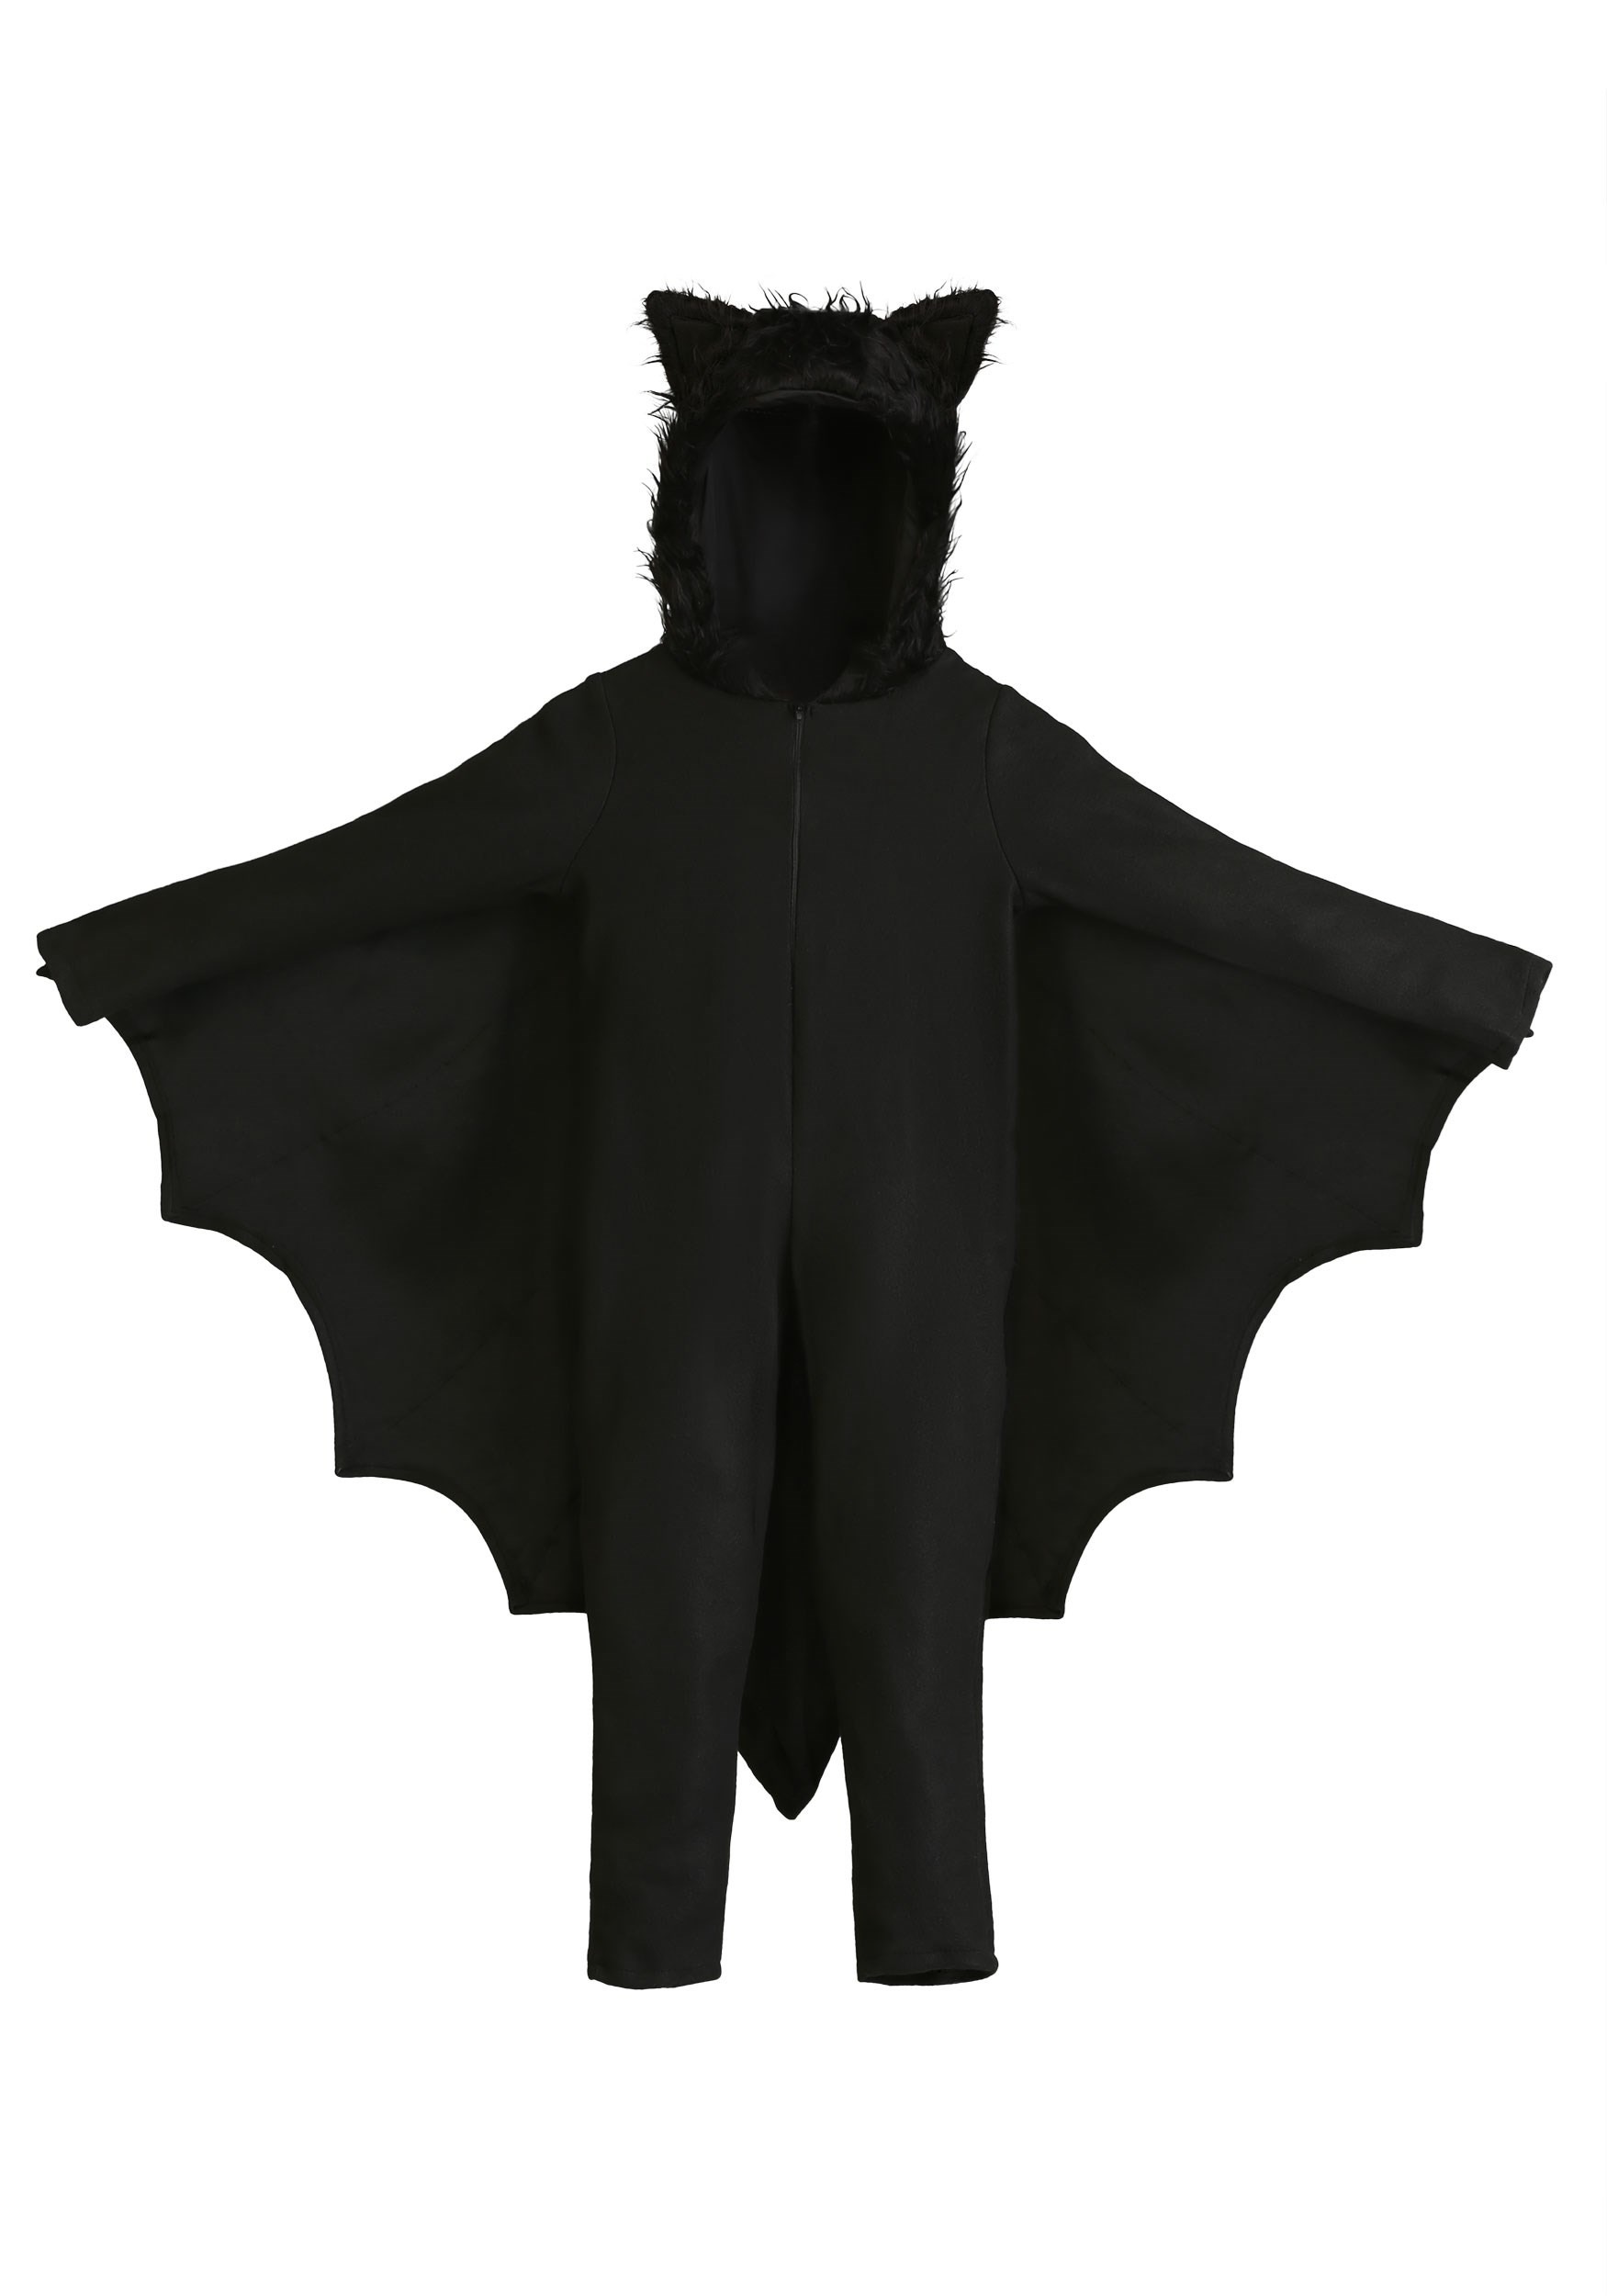 Toddler Fleece Bat Costume | Exclusive | Made By us